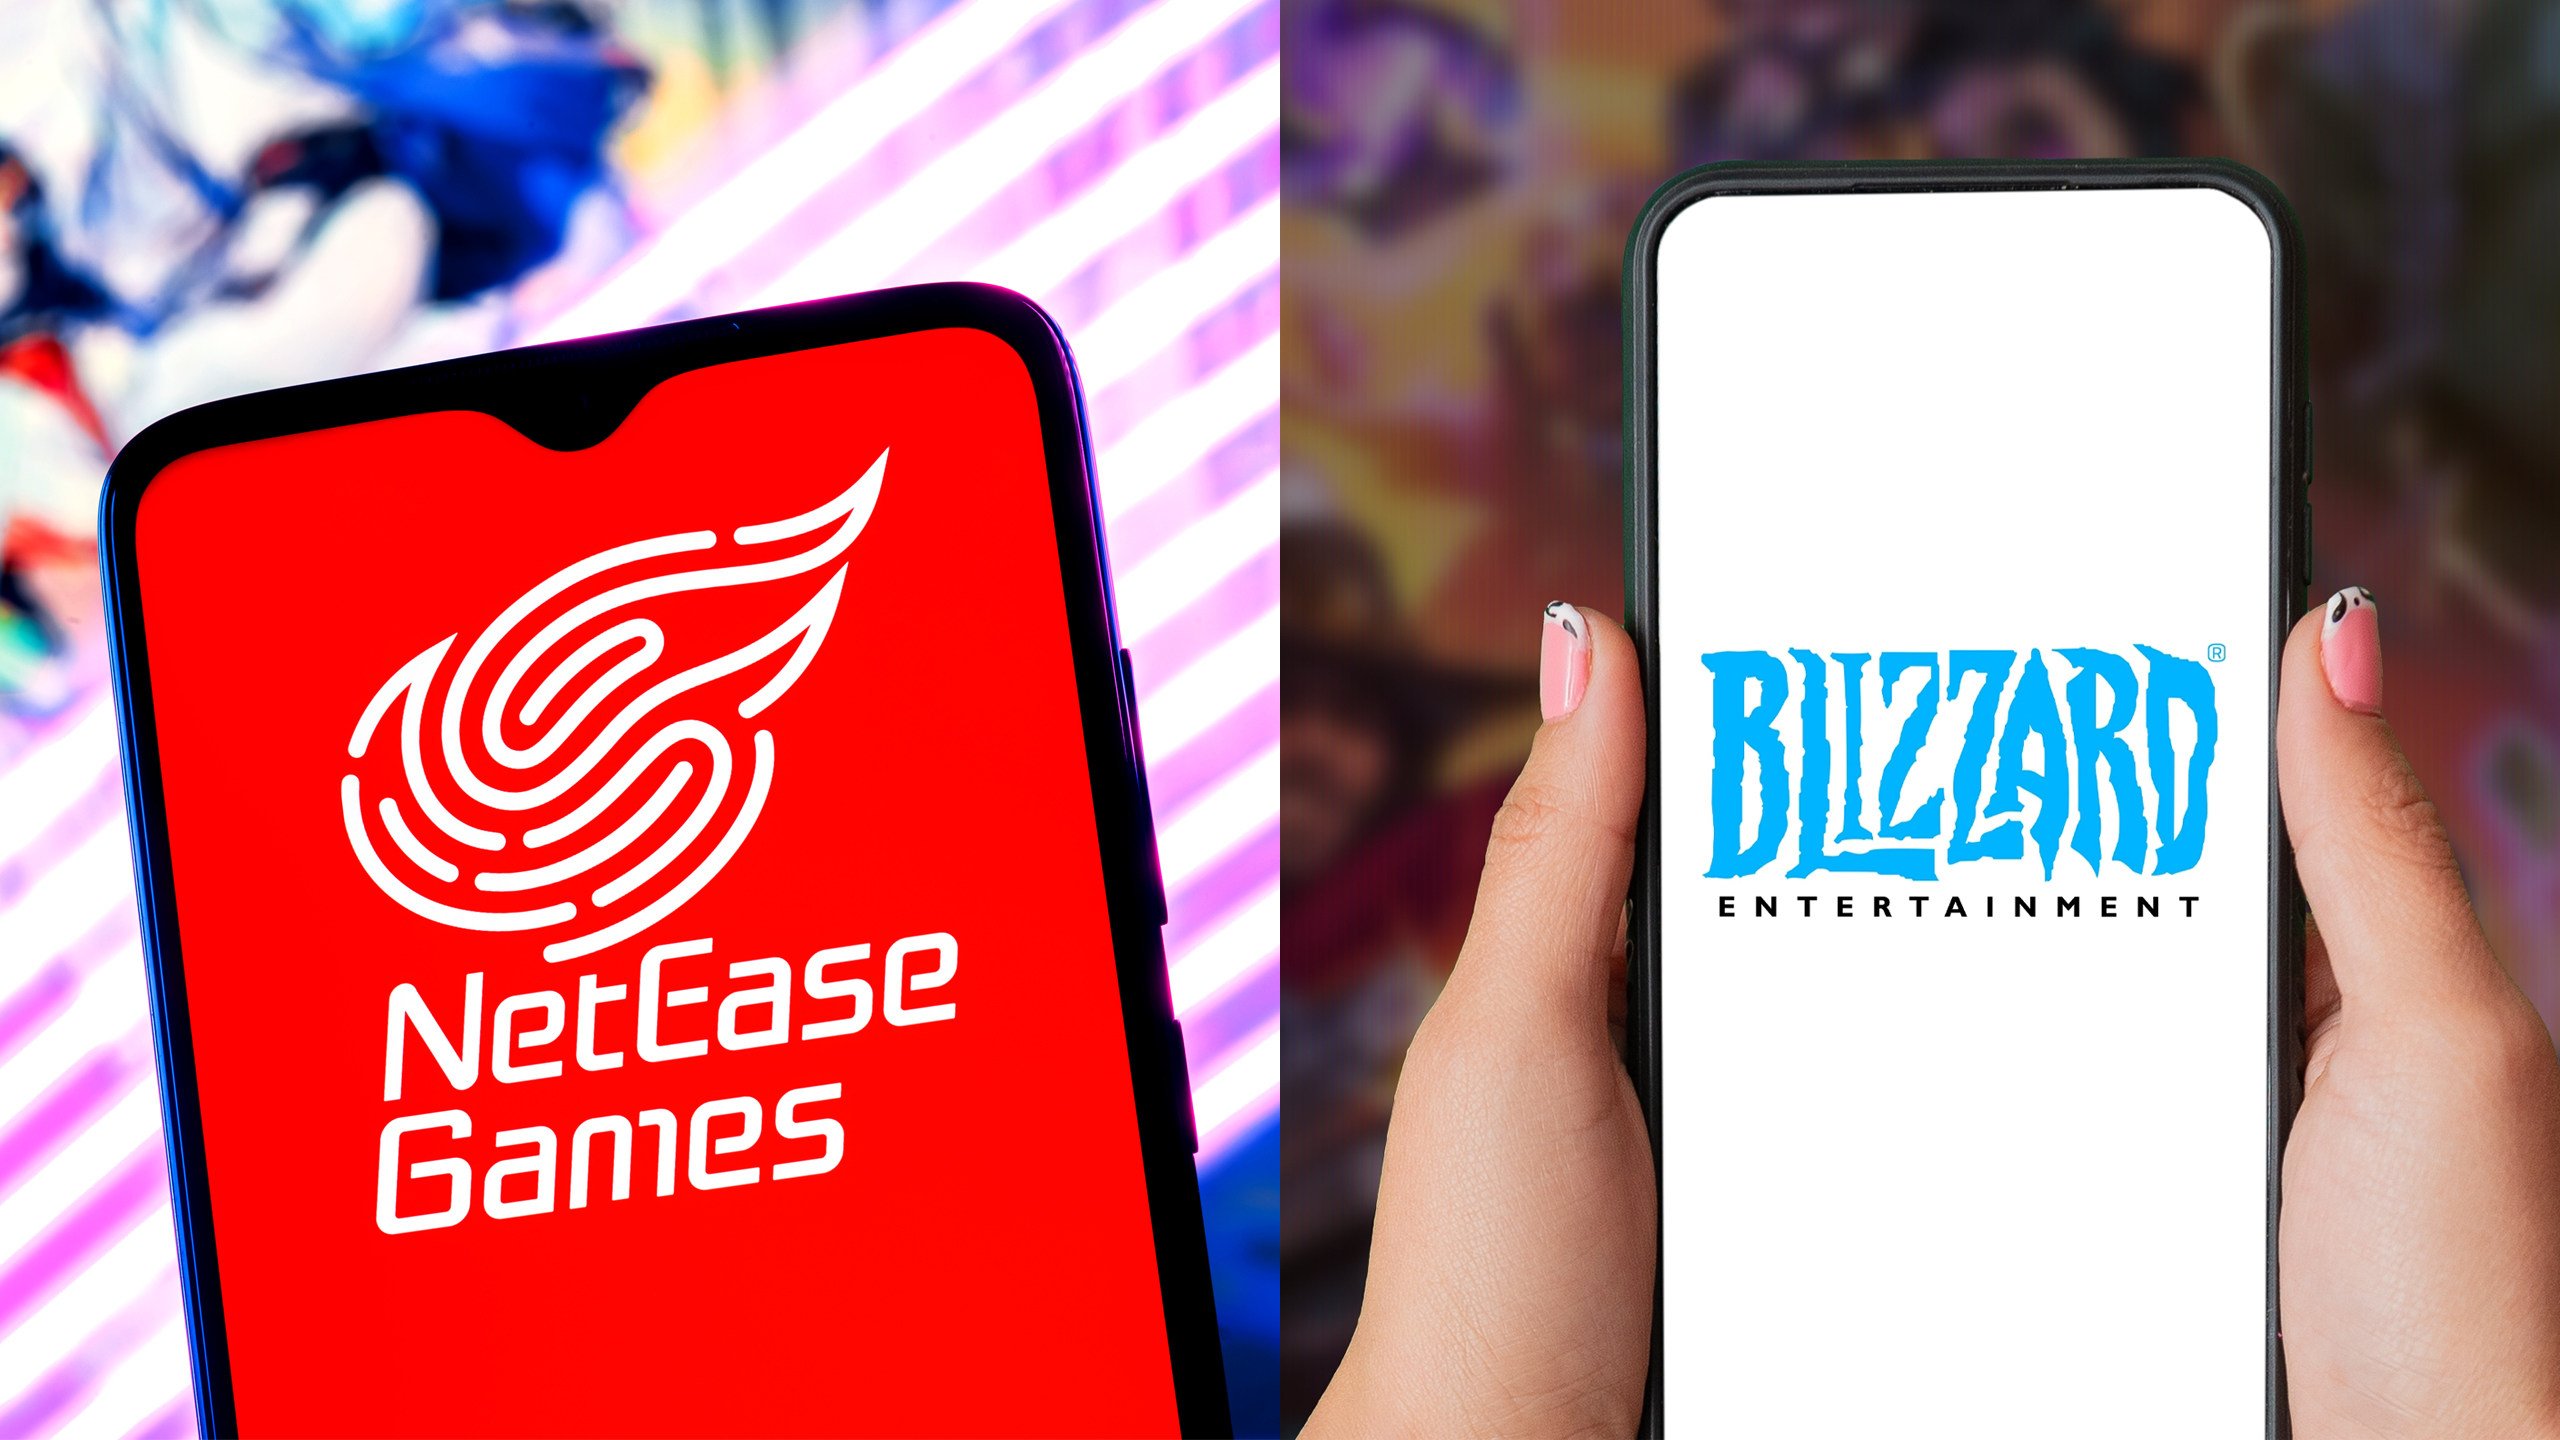 A new agreement between Blizzard Entertainment and NetEase is expected to bring hit video game titles back to China after an absence of more than a year. Photo: Shutterstock